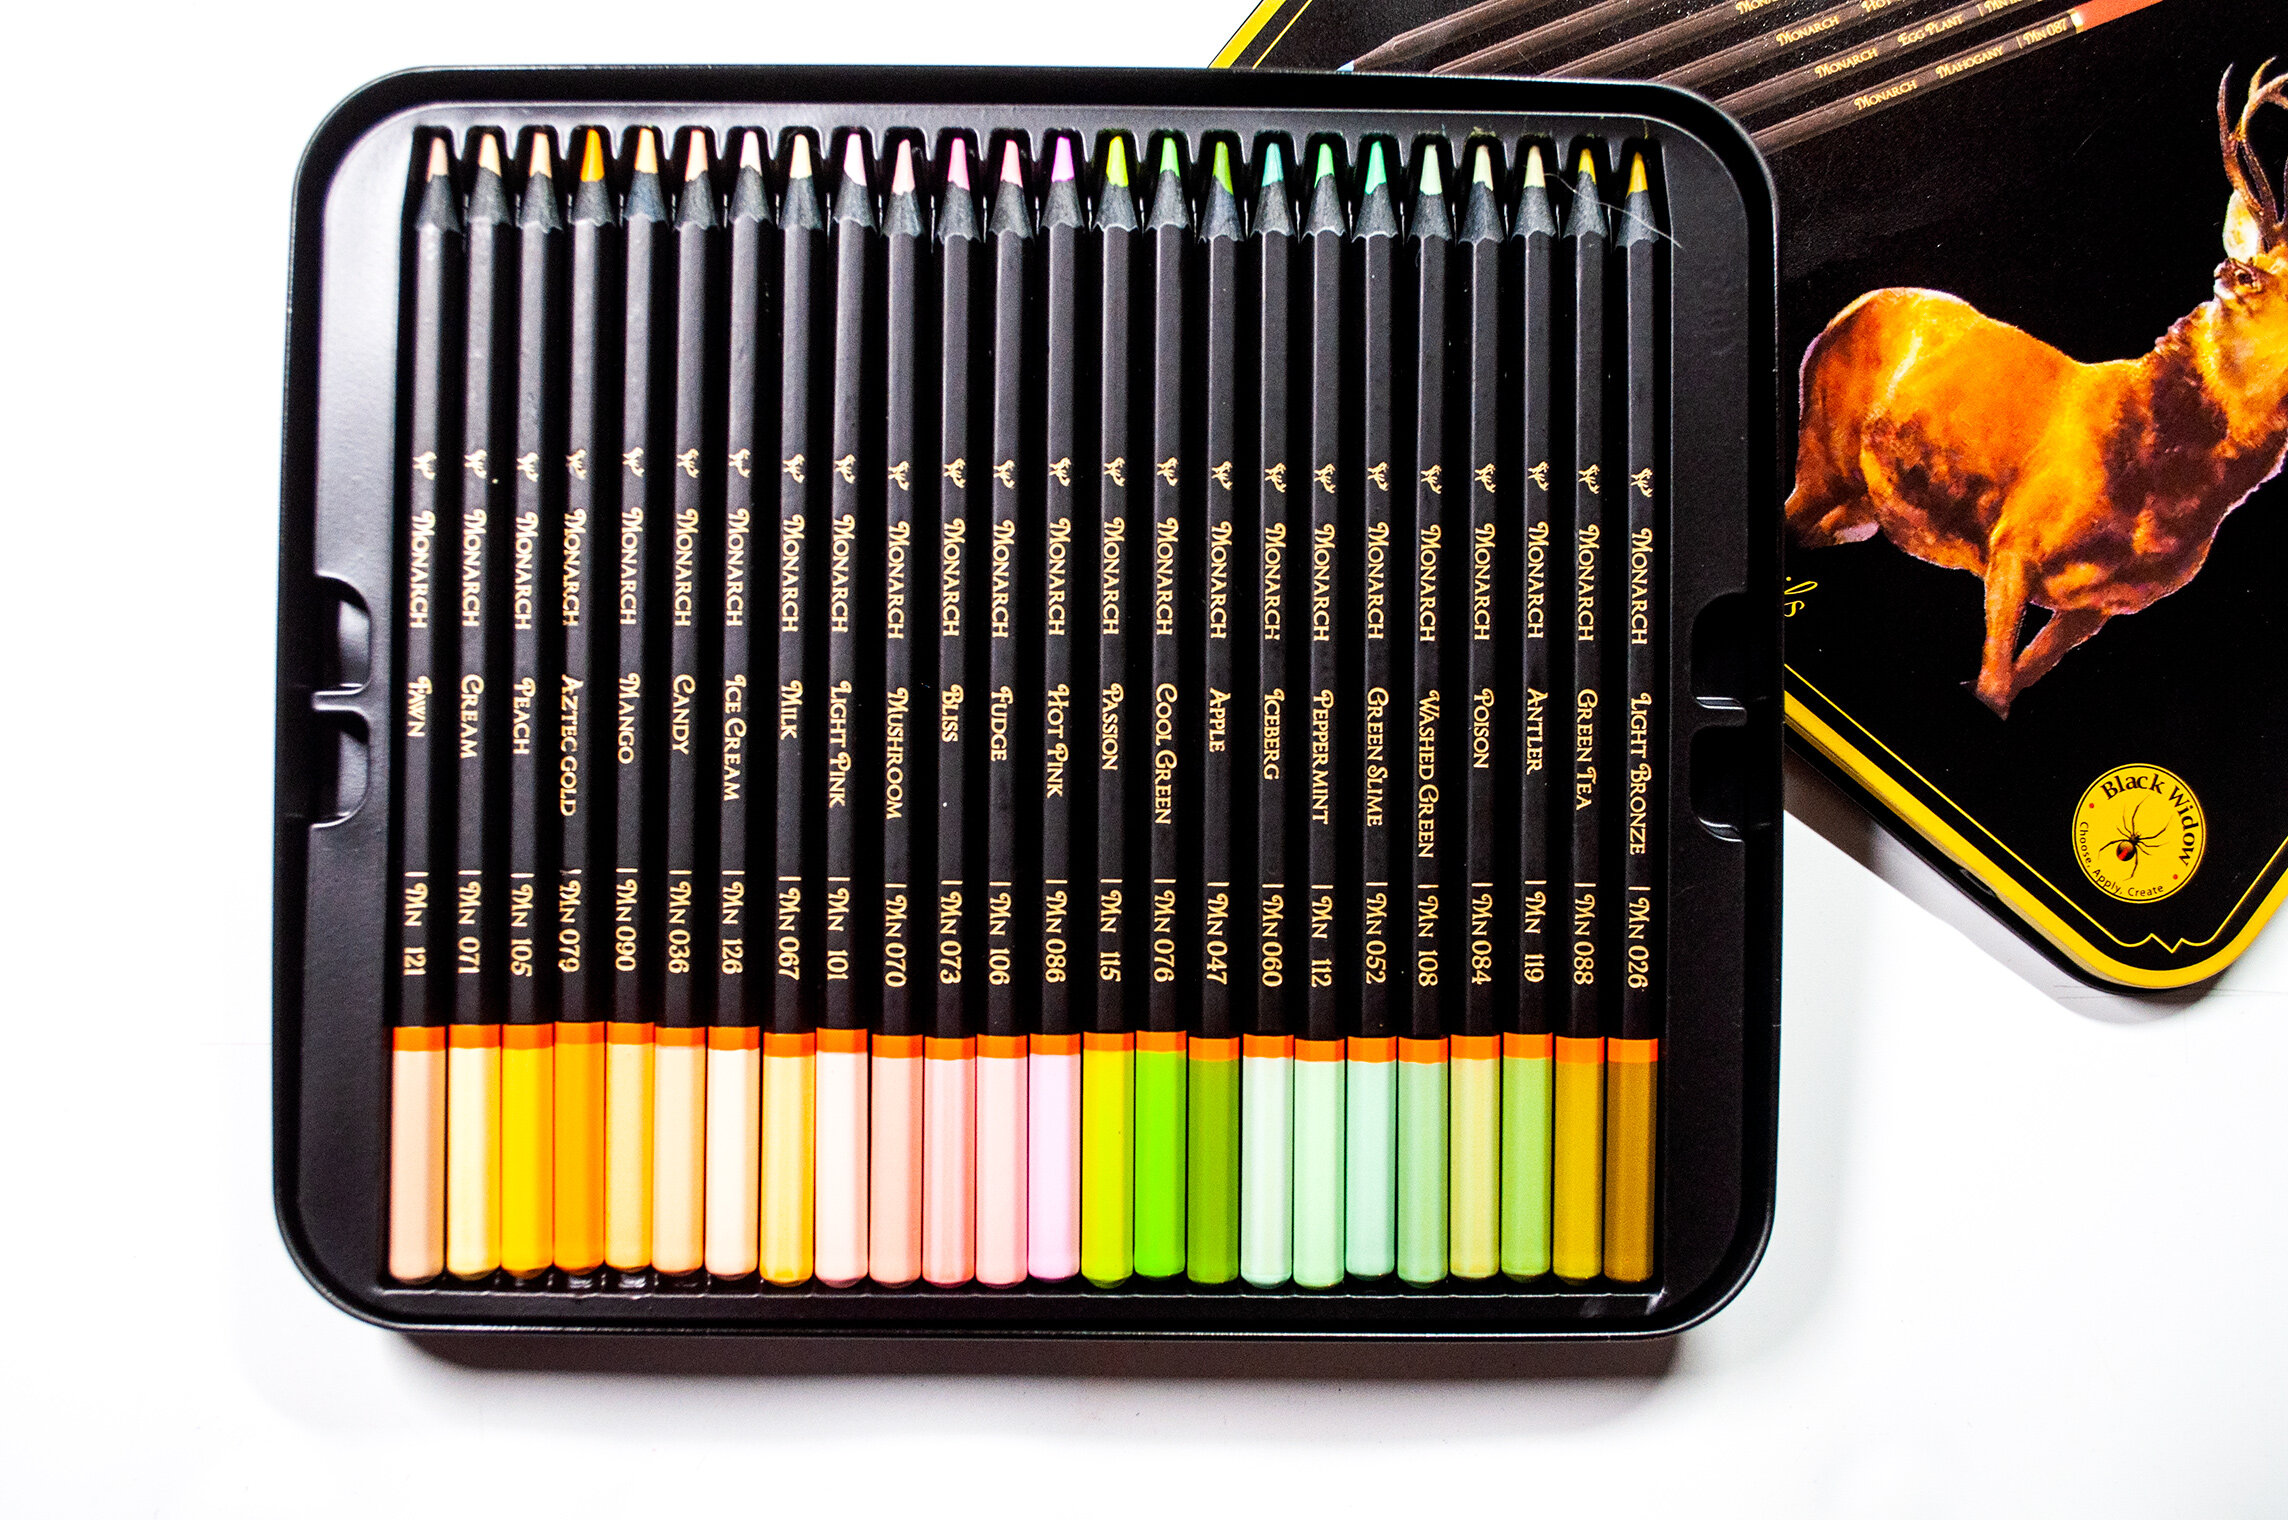 Black Widow Monarch Colored Pencils For Adult Coloring - 48 Coloring Pencils  With Smooth Pigments - Best Color Pencil Set For Adult Coloring Books An -  Imported Products from USA - iBhejo